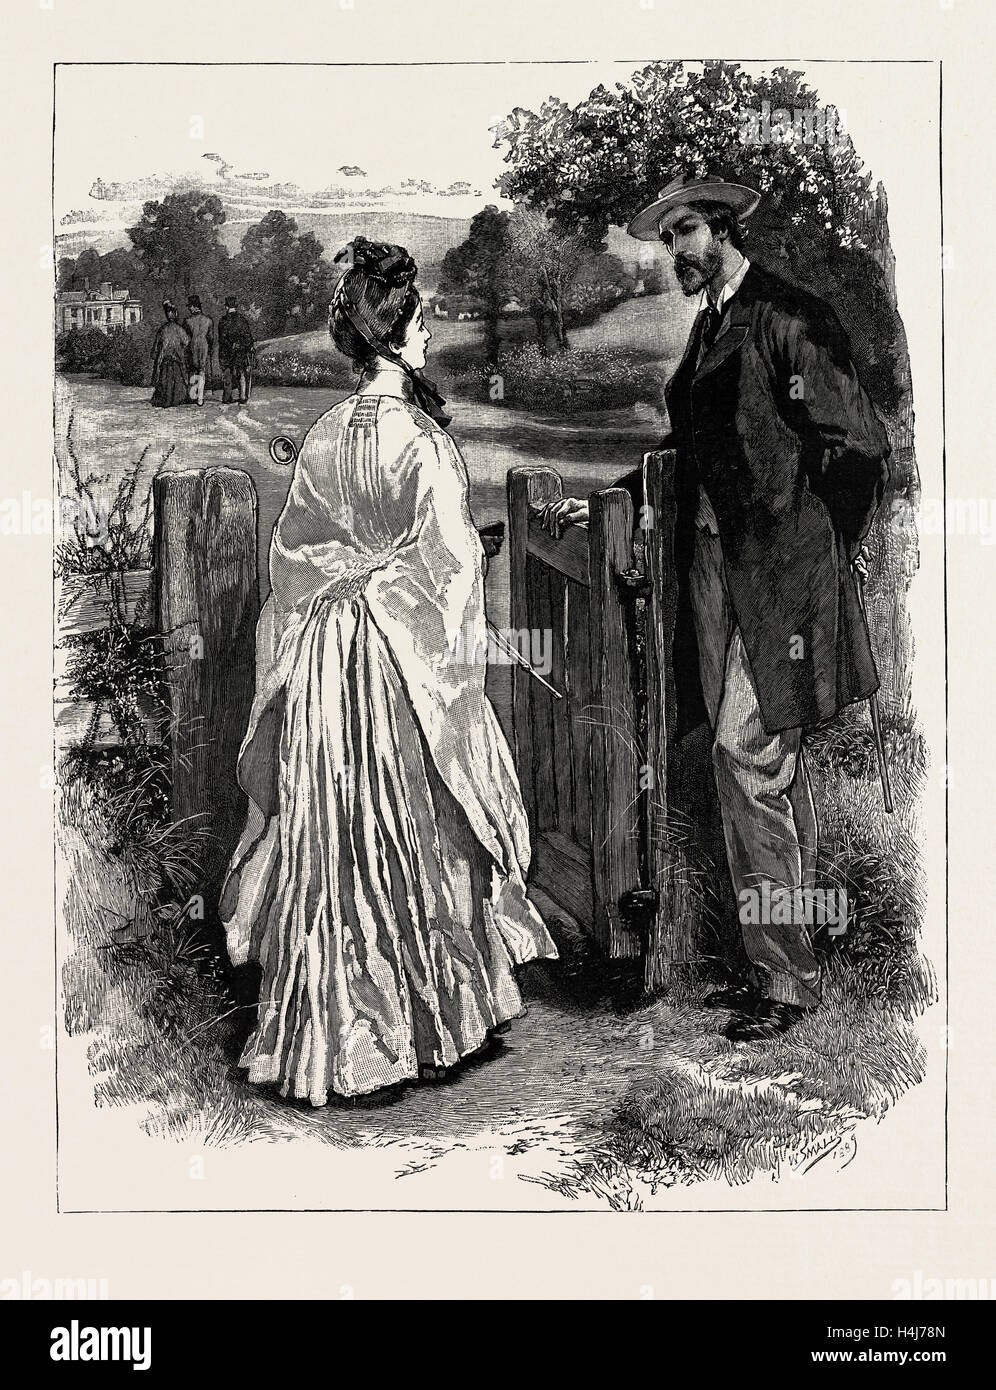 They were now arrived at the doctor's house. , 'THE NEW PRINCE FORTUNATUS', BY WILLIAM BLACK, DRAWN BY W. SMALL, 1889 Stock Photo